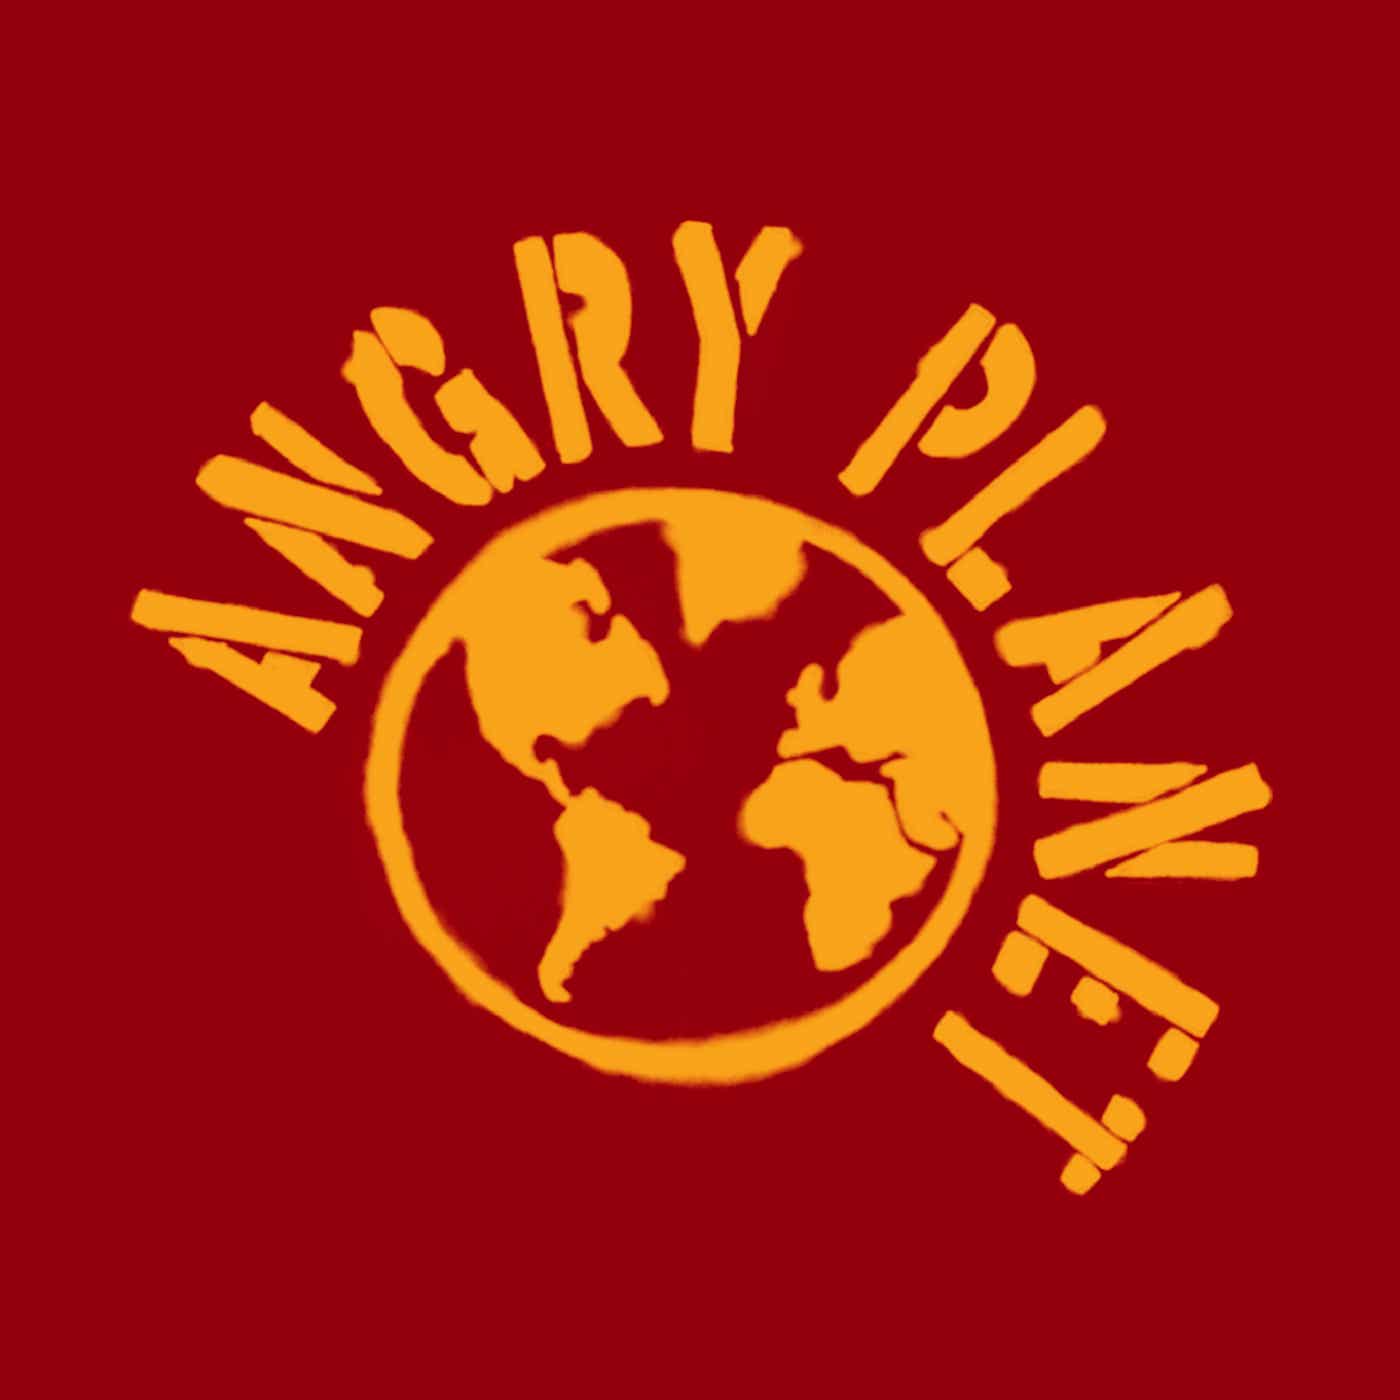 Angry Planet Subscriber Feed (private feed for richard.pearce42@gmail.com)